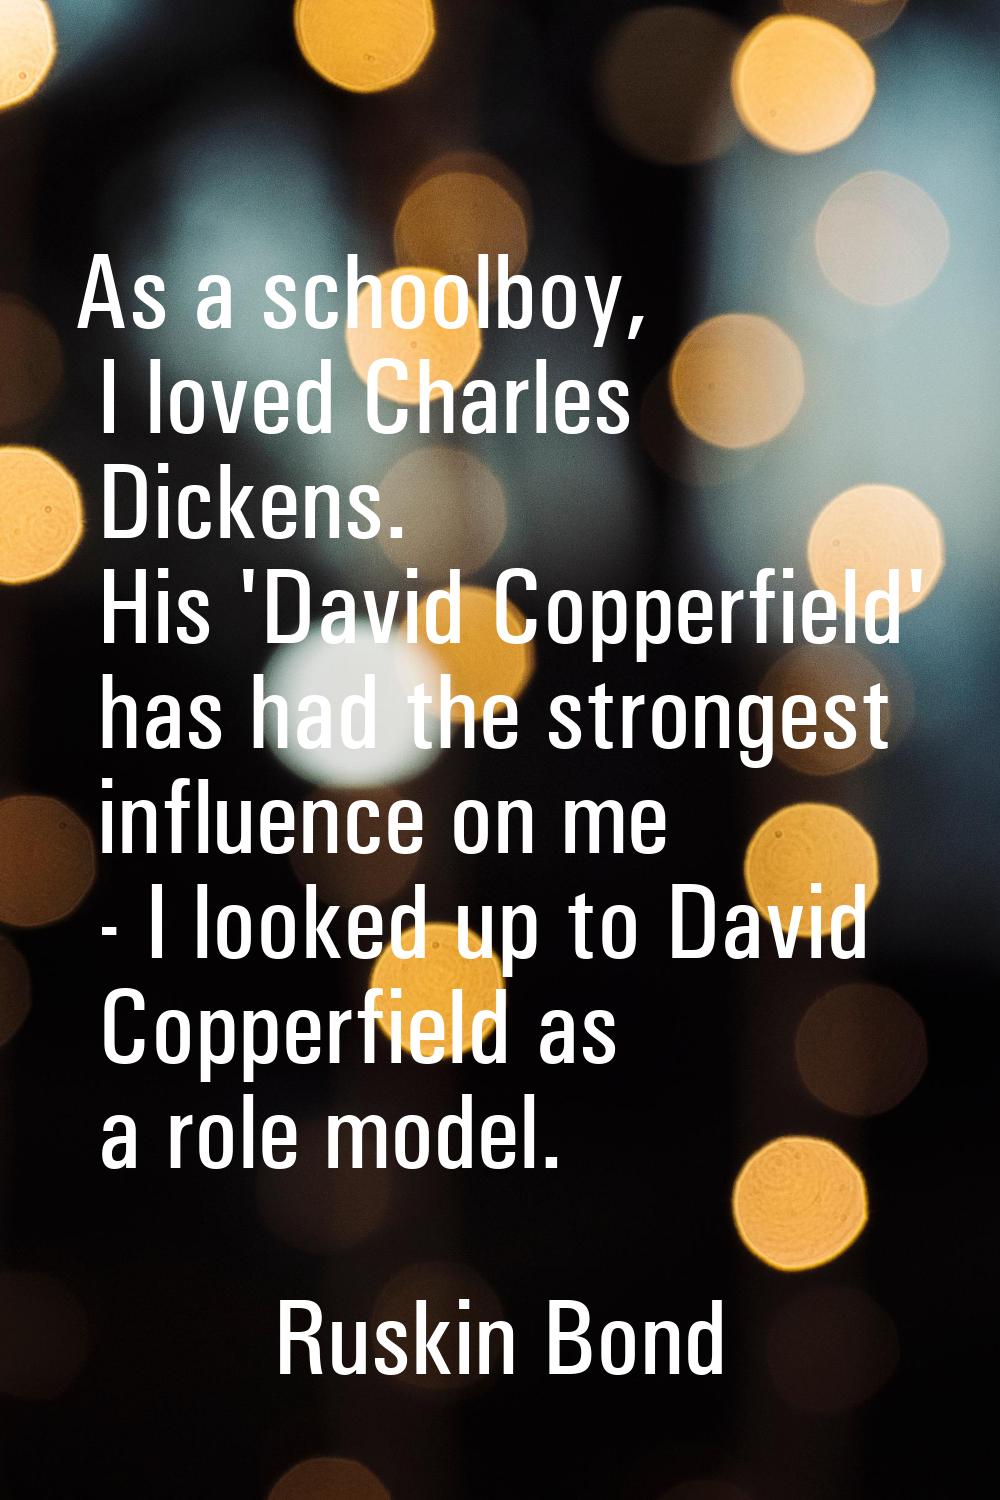 As a schoolboy, I loved Charles Dickens. His 'David Copperfield' has had the strongest influence on